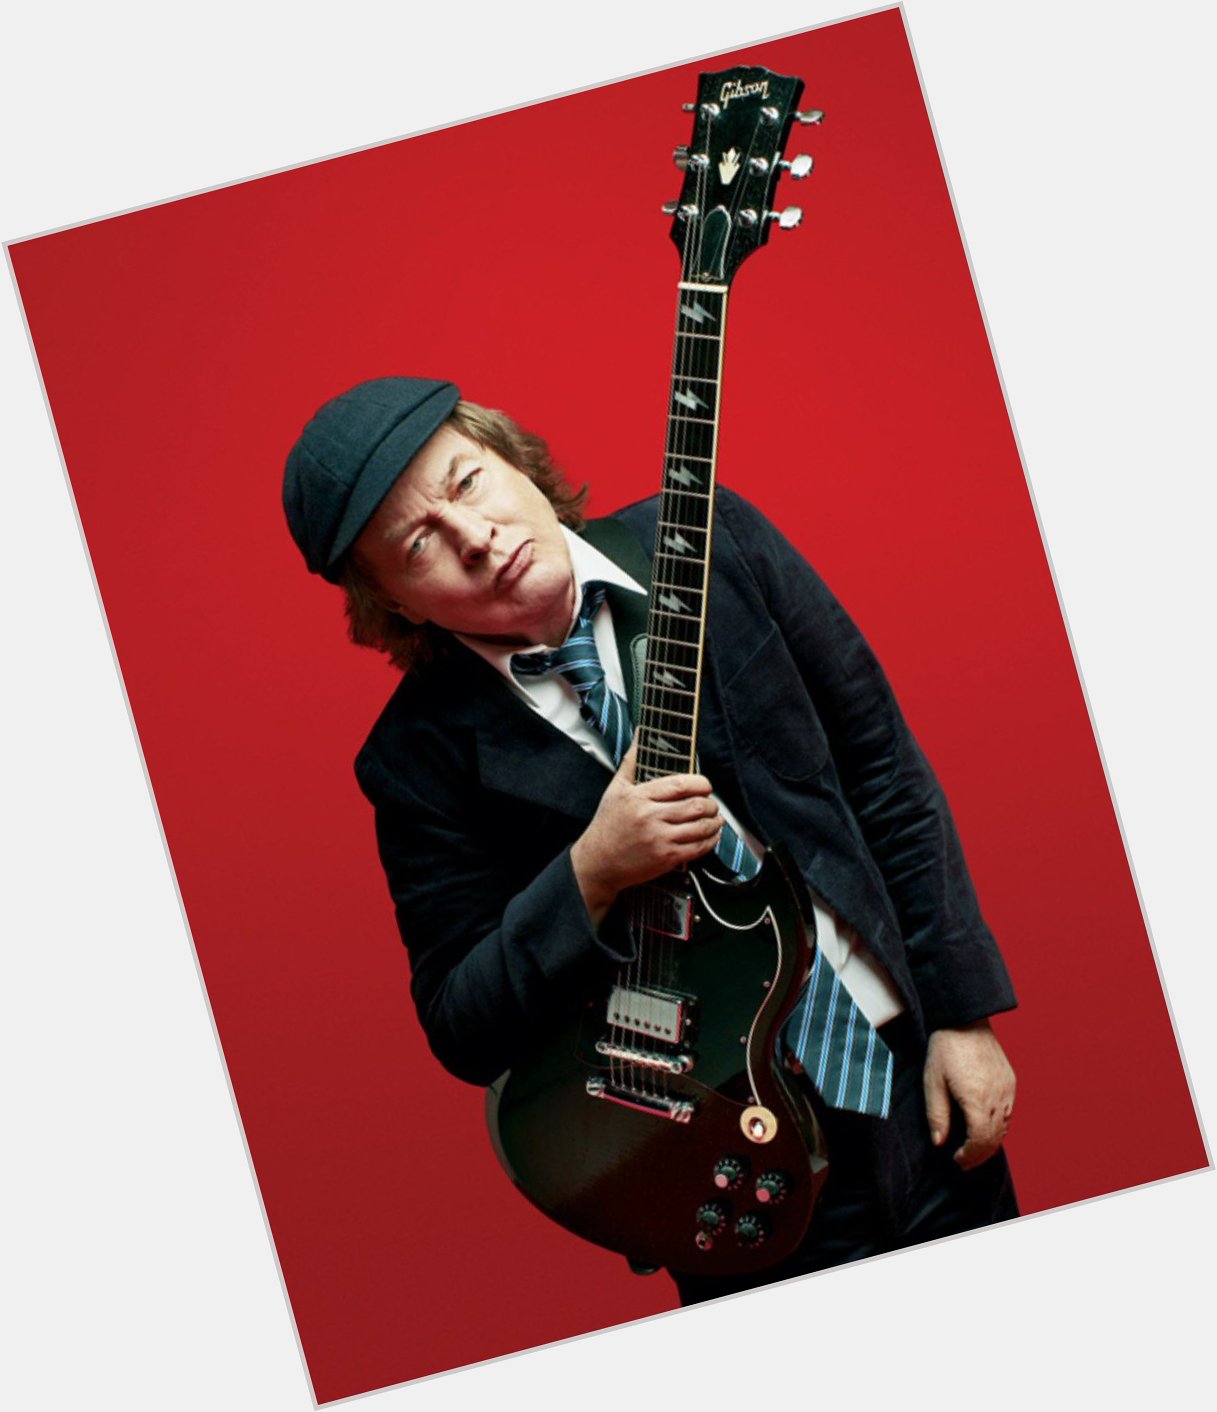 Happy 67 birthday to the legendary AC/DC guitarist Angus Young! 